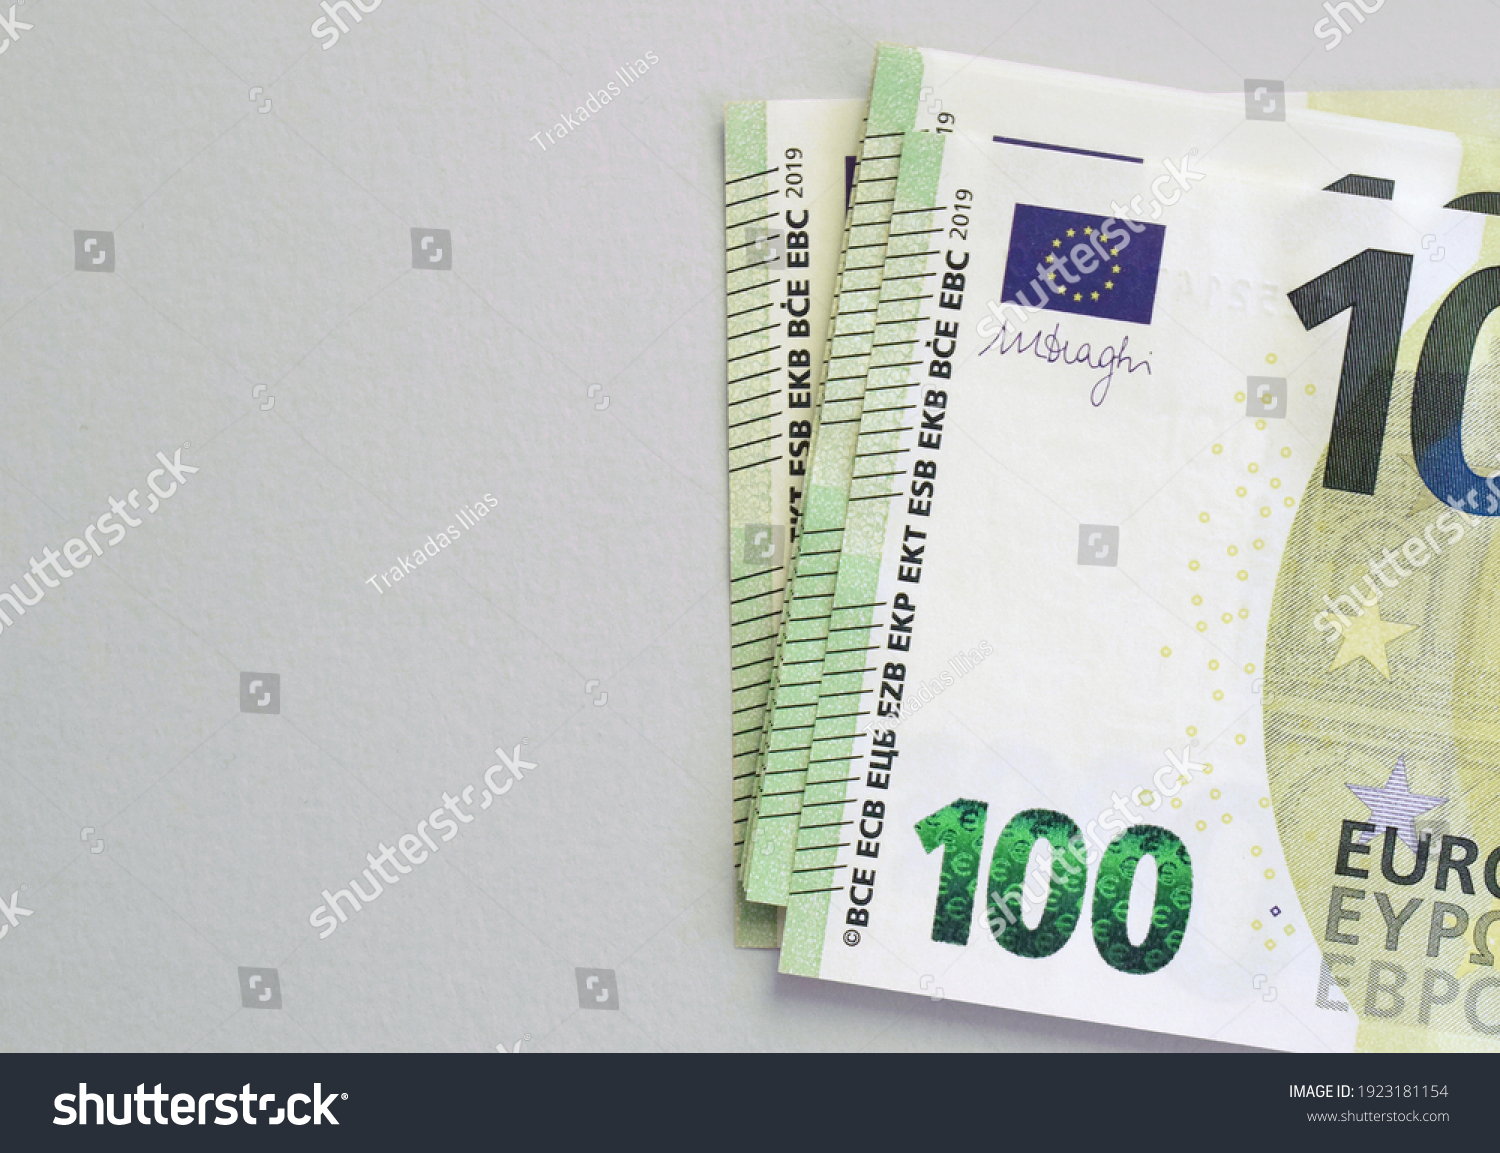 100 euro banknotes on grey background. European currency #1923181154